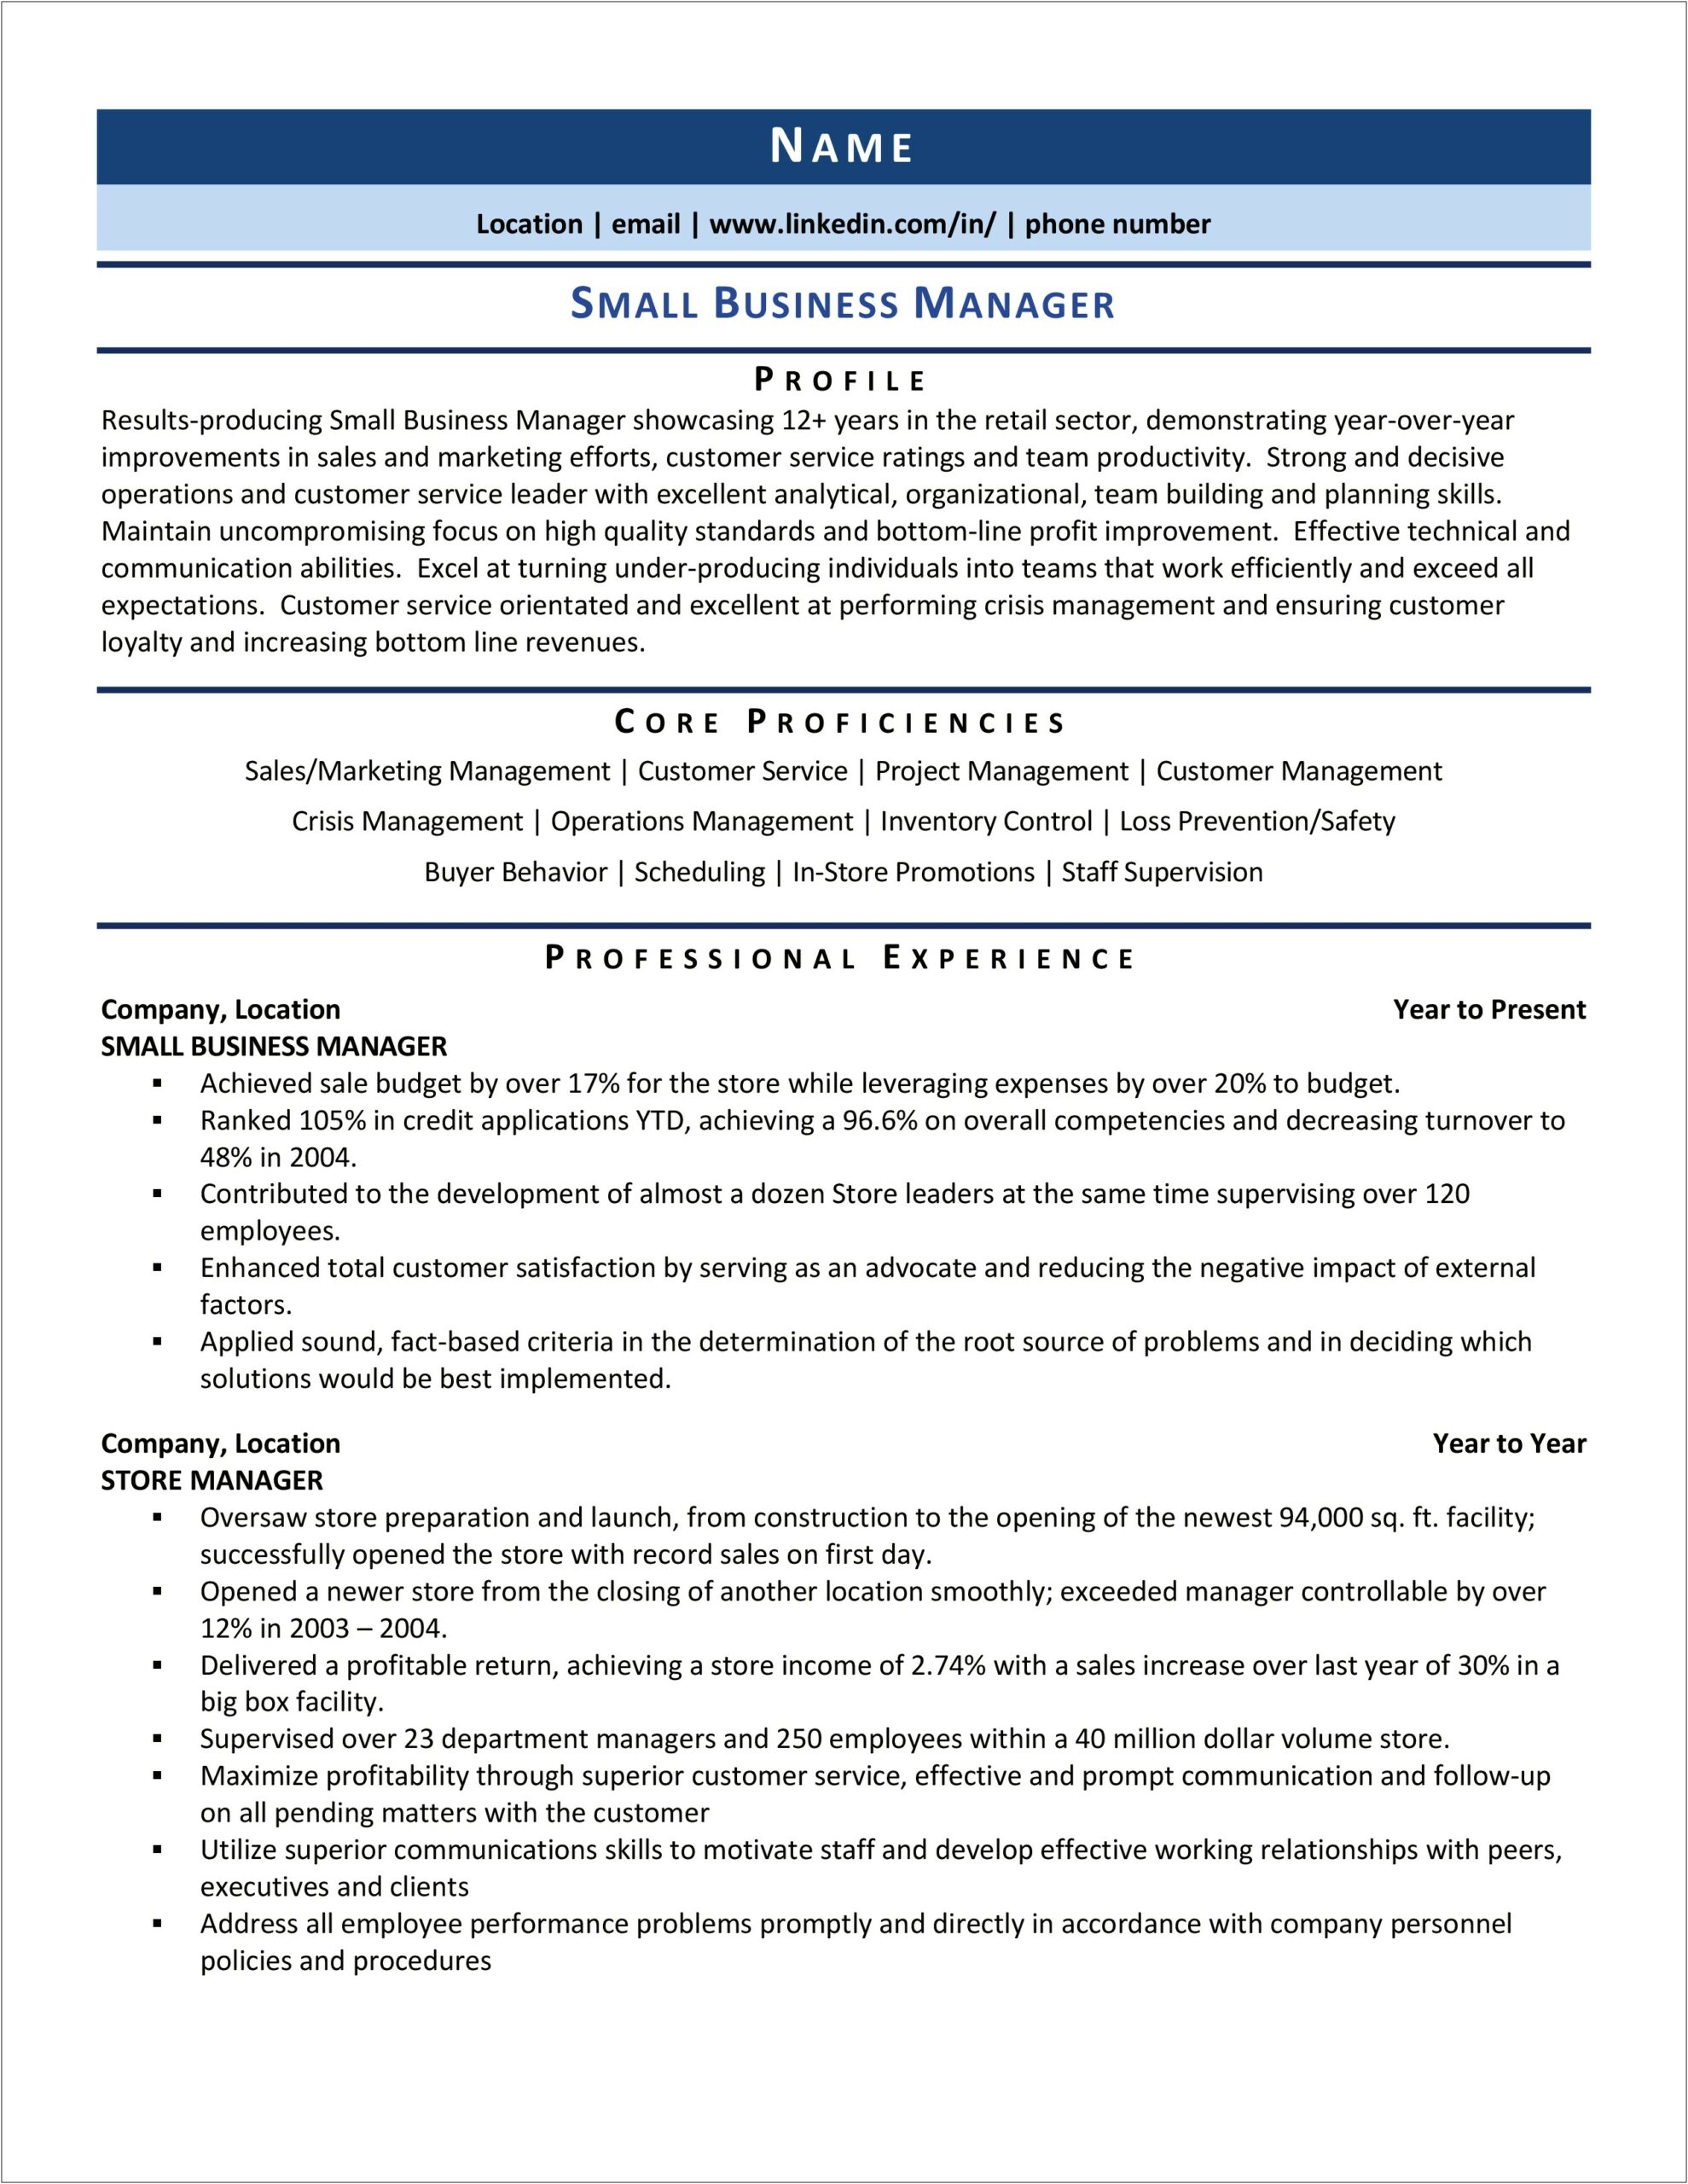 Example Of Small Business Owner Resume